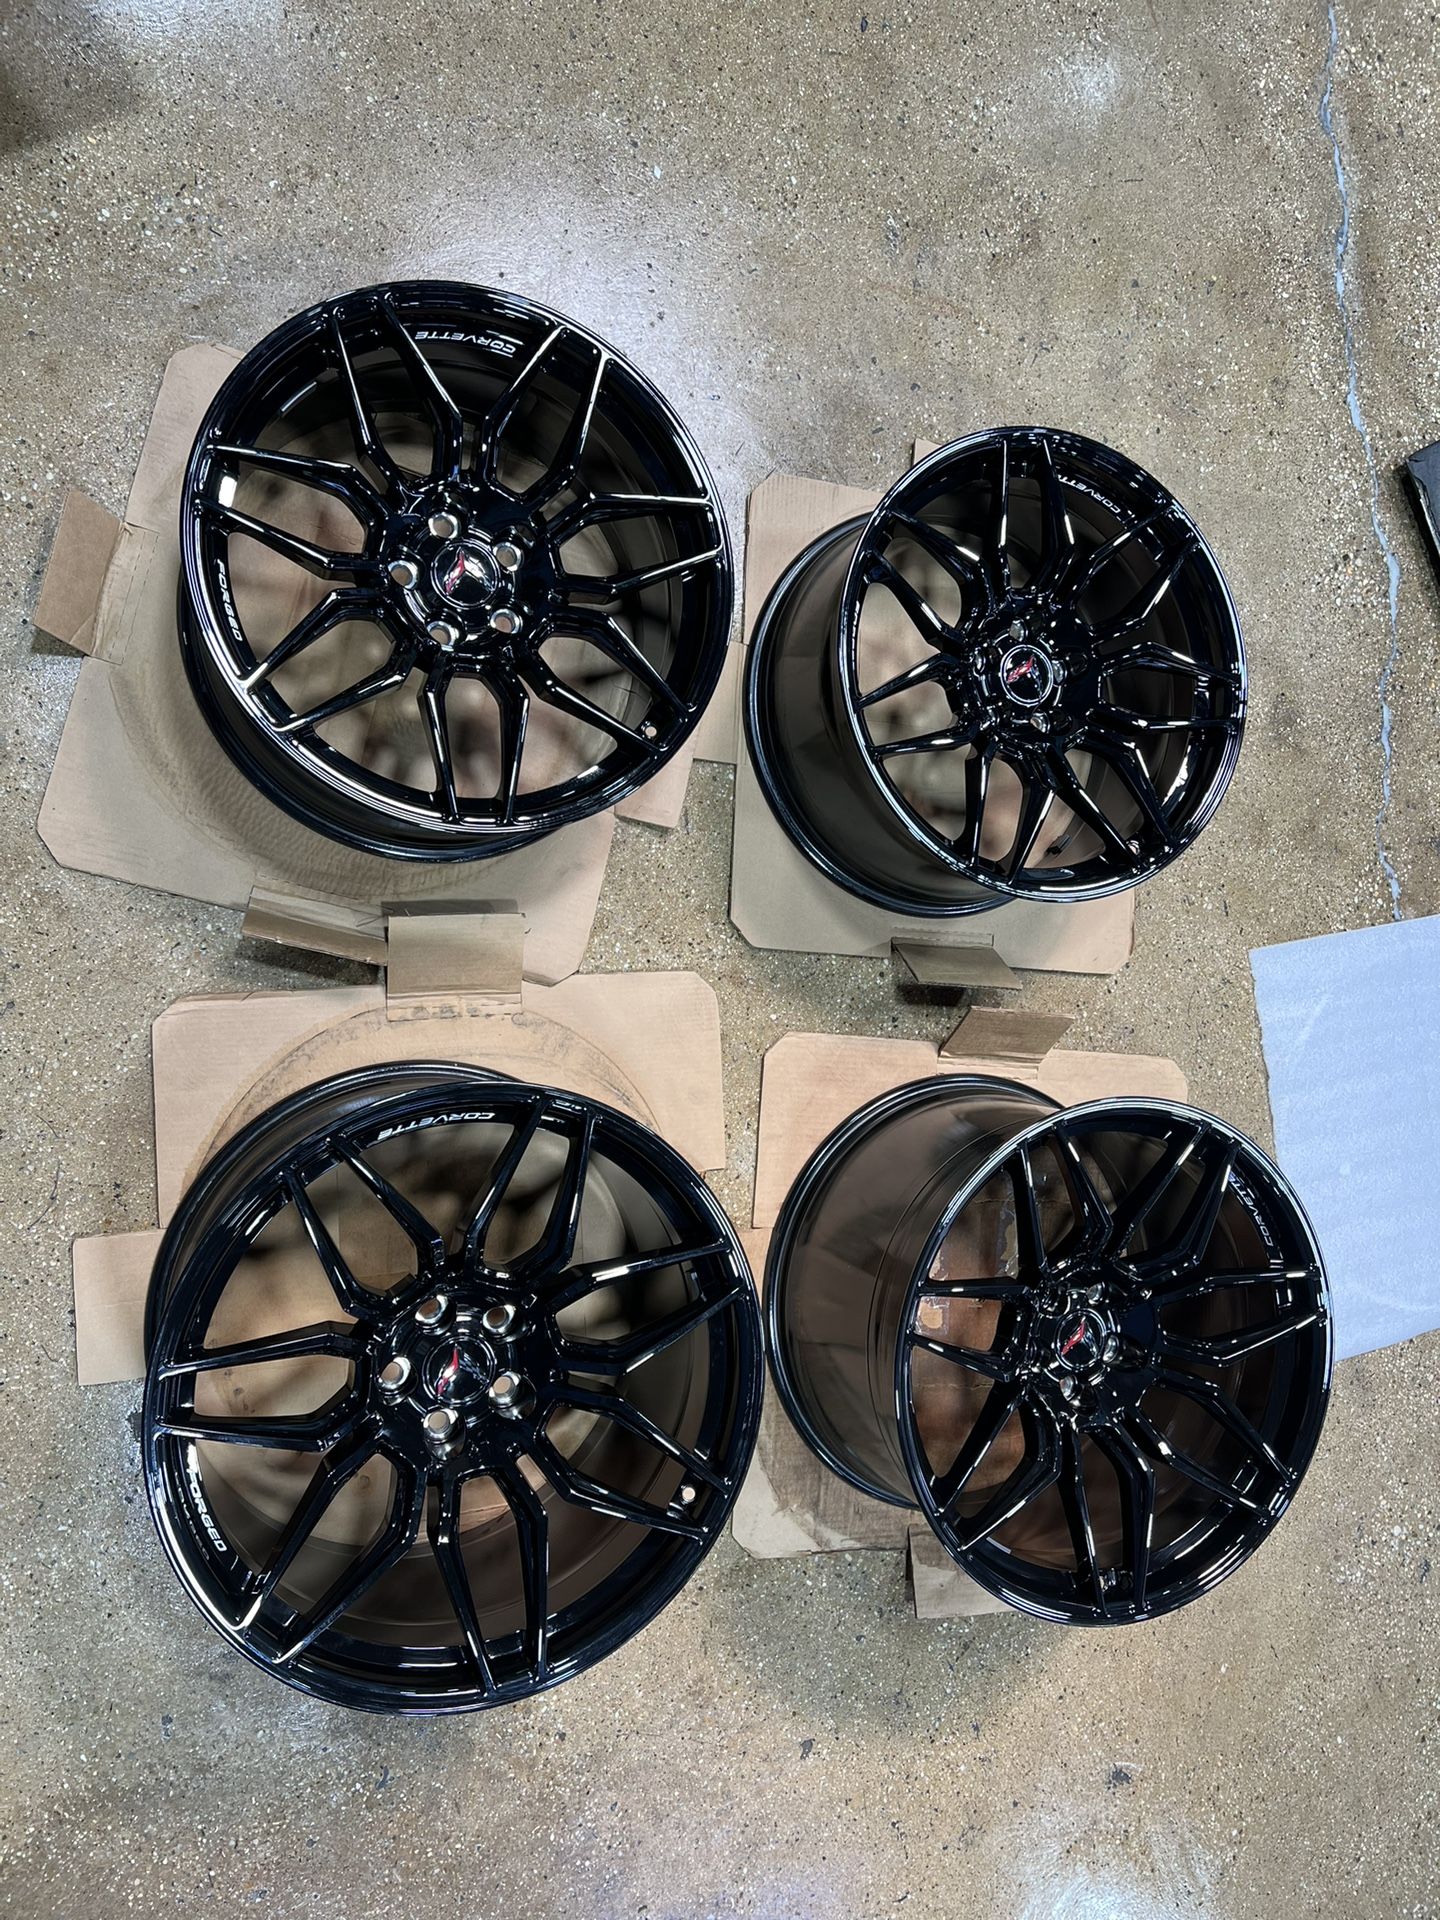 Brand New Z06 Wheels For Sale ! 